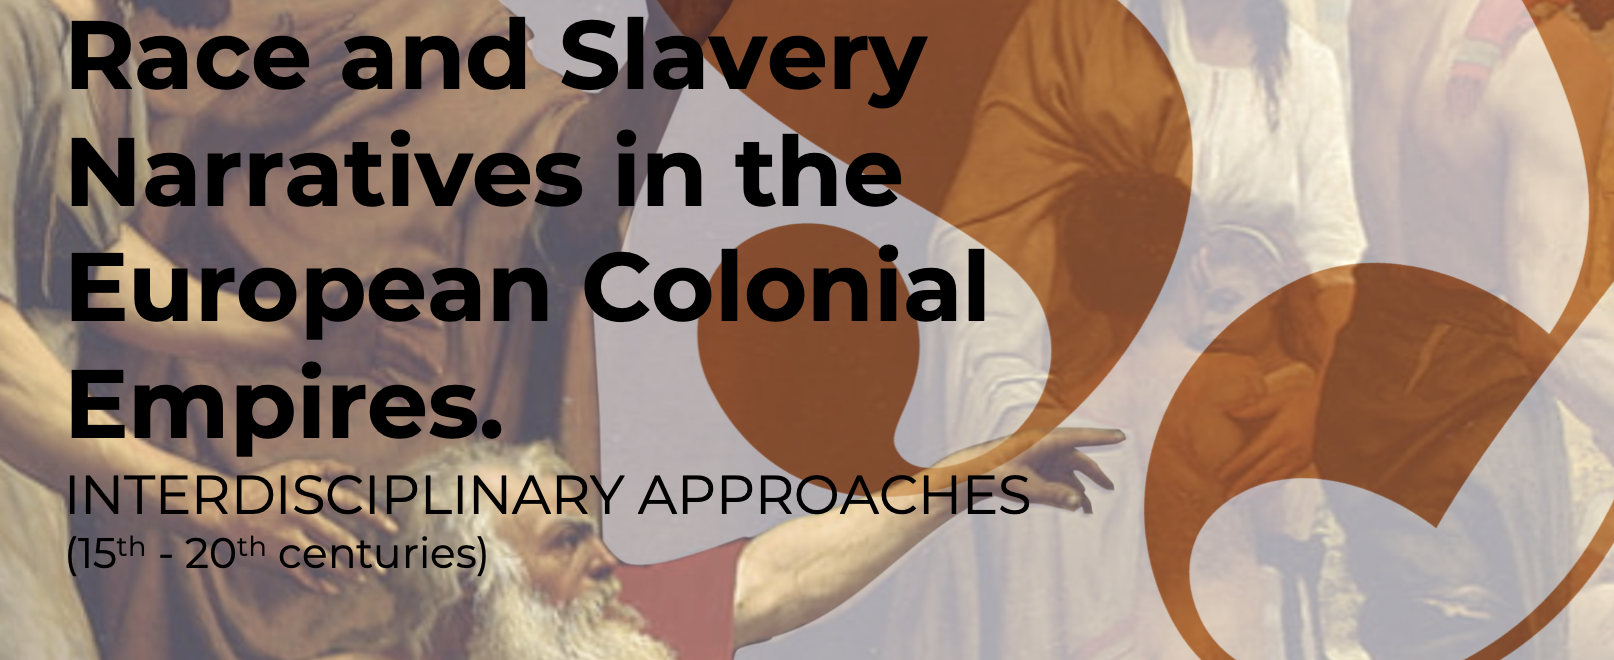 International Conference Race and Slavery Narratives in the European Colonial Empires